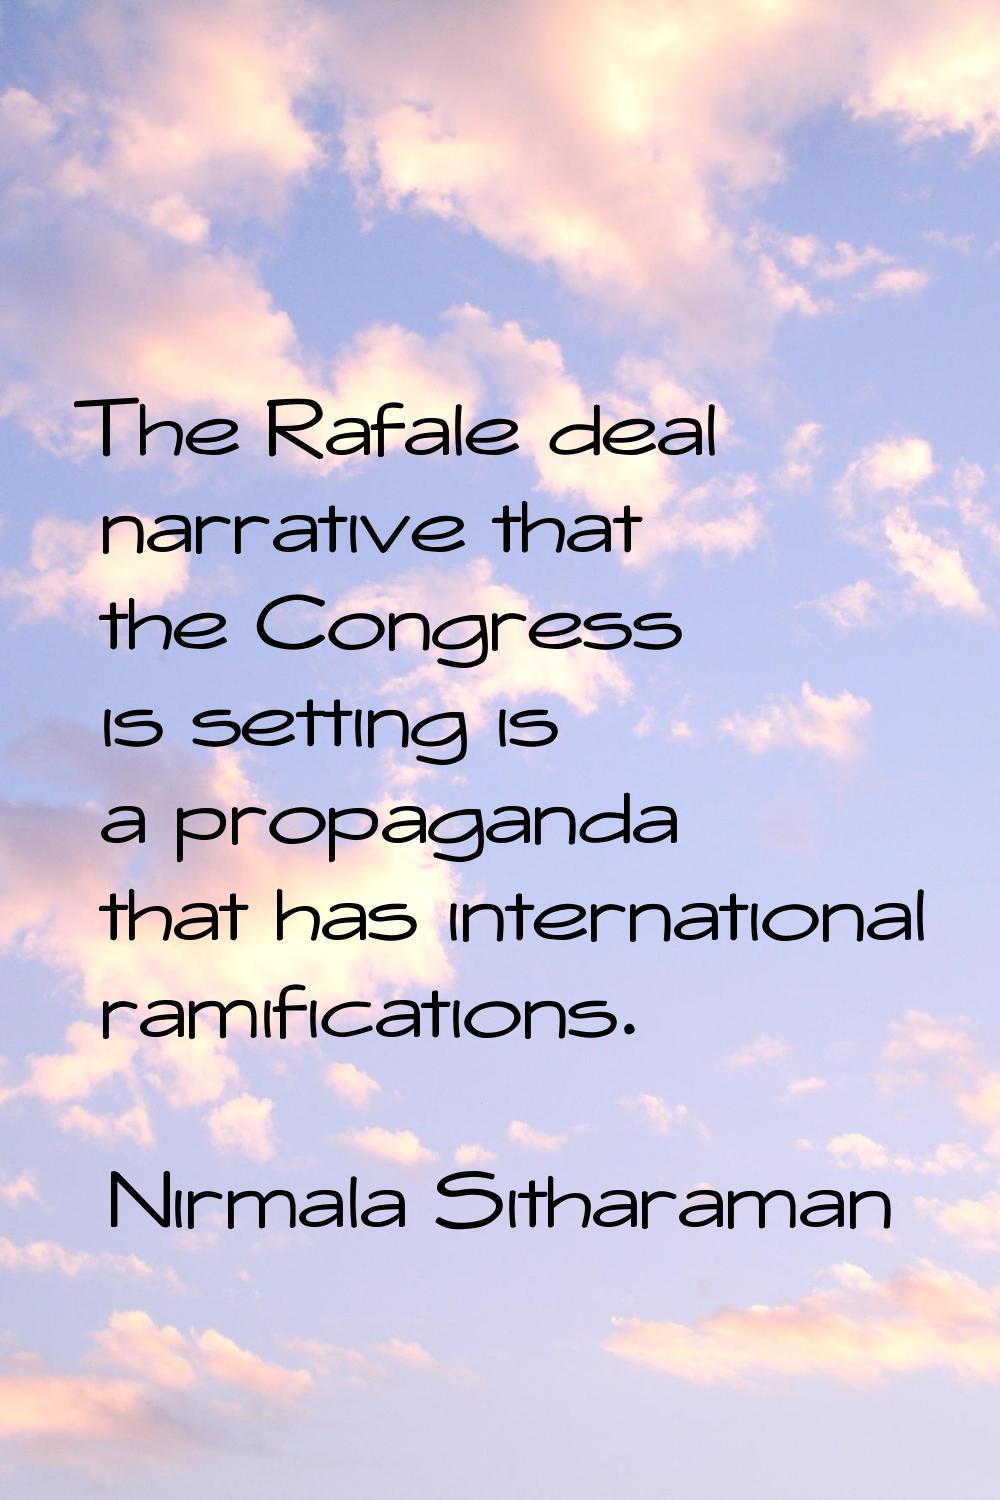 The Rafale deal narrative that the Congress is setting is a propaganda that has international ramif